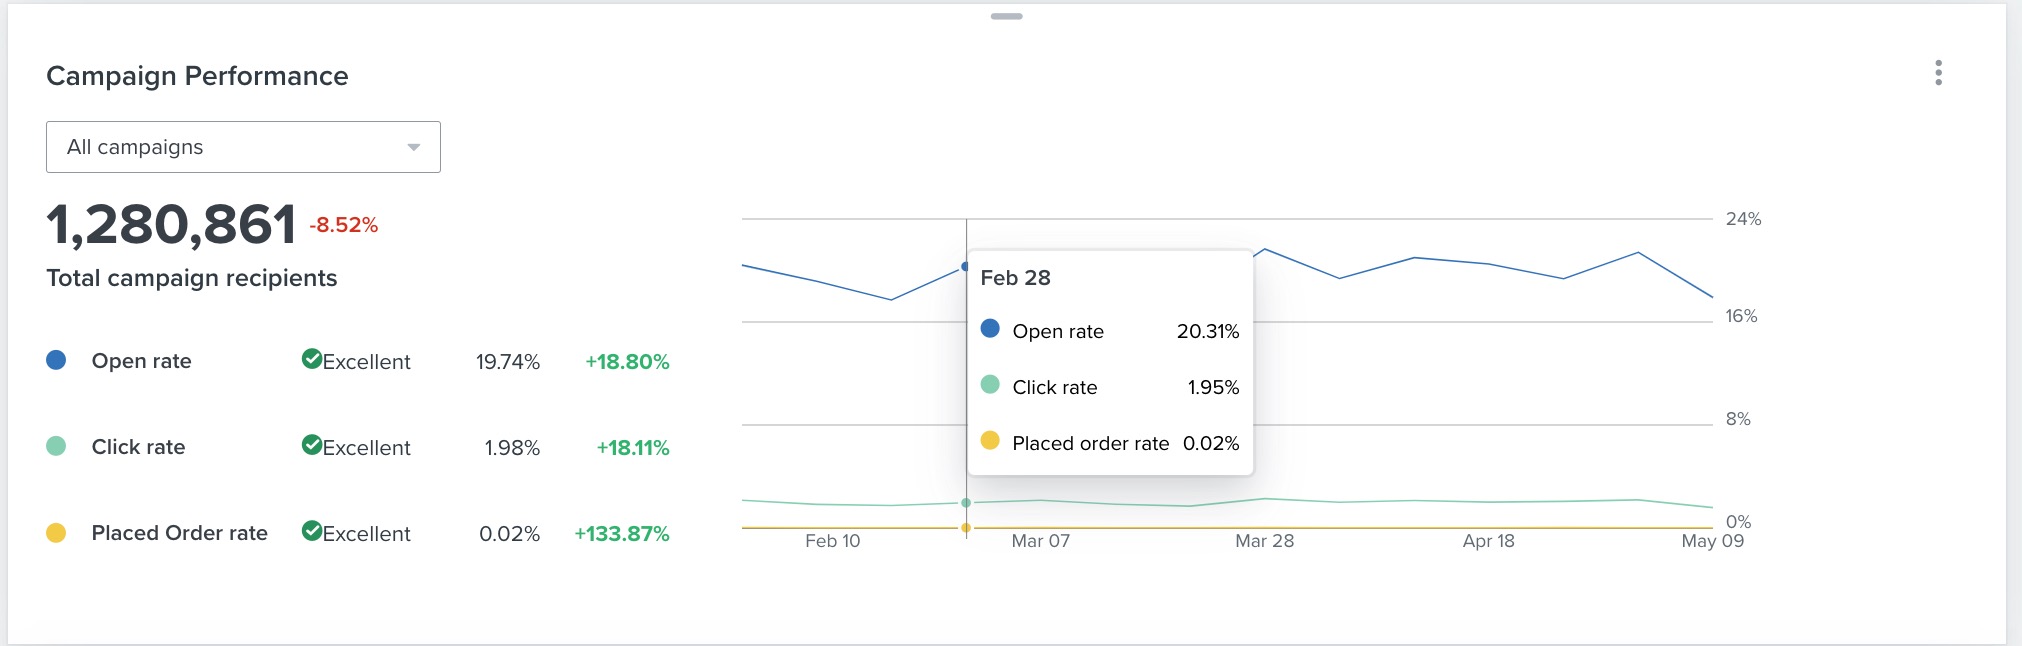 By hovering over the campaign performance card, with open rate, click rate, and placed order rate for that point on chart